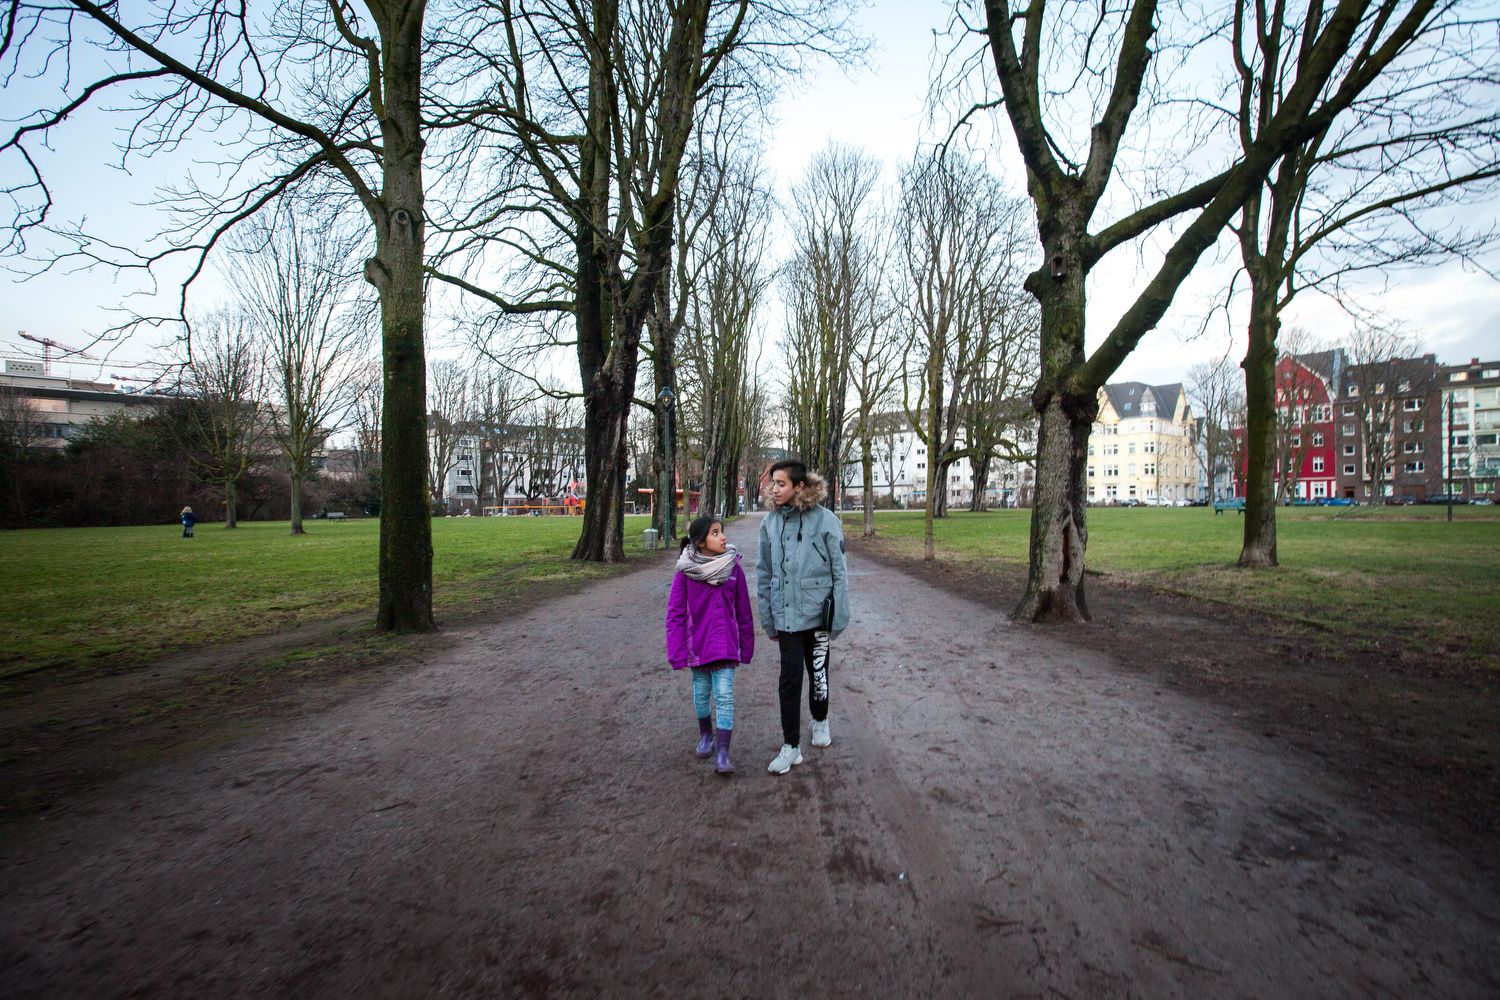 Milad (right) with his sister Mahya at the Frankenplatz park near their shelter in Düsseldorf. Image by Diana Markosian. Germany, 2017.